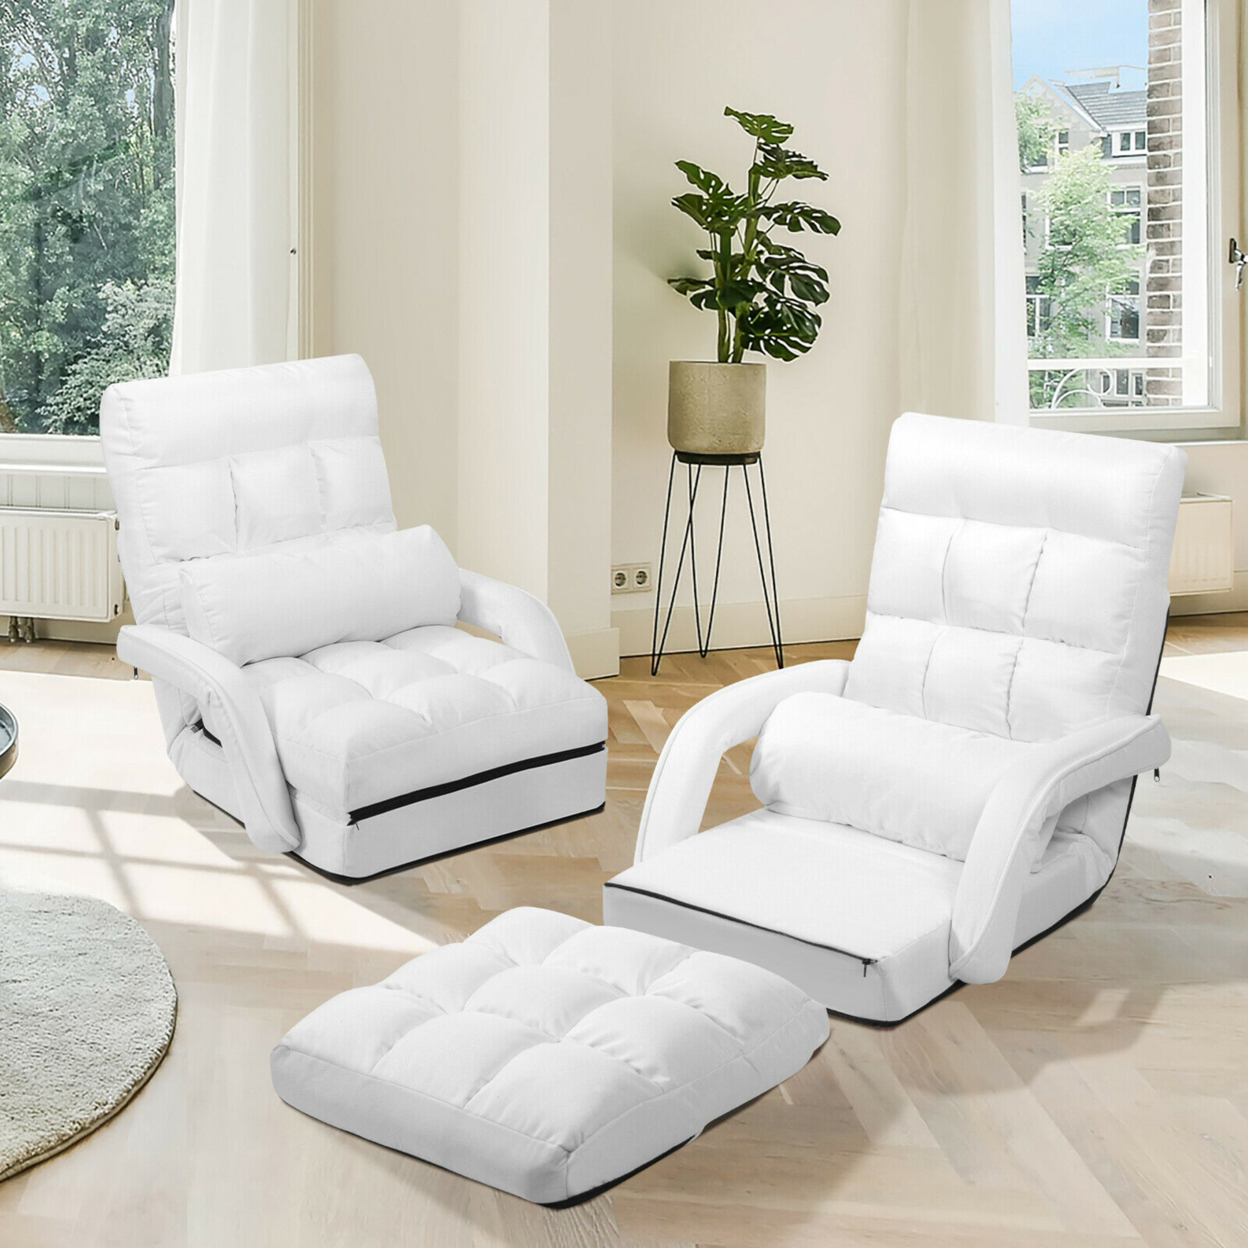 White Folding Lazy Sofa Floor Chair Sofa Lounger Bed With Armrests And Pillow